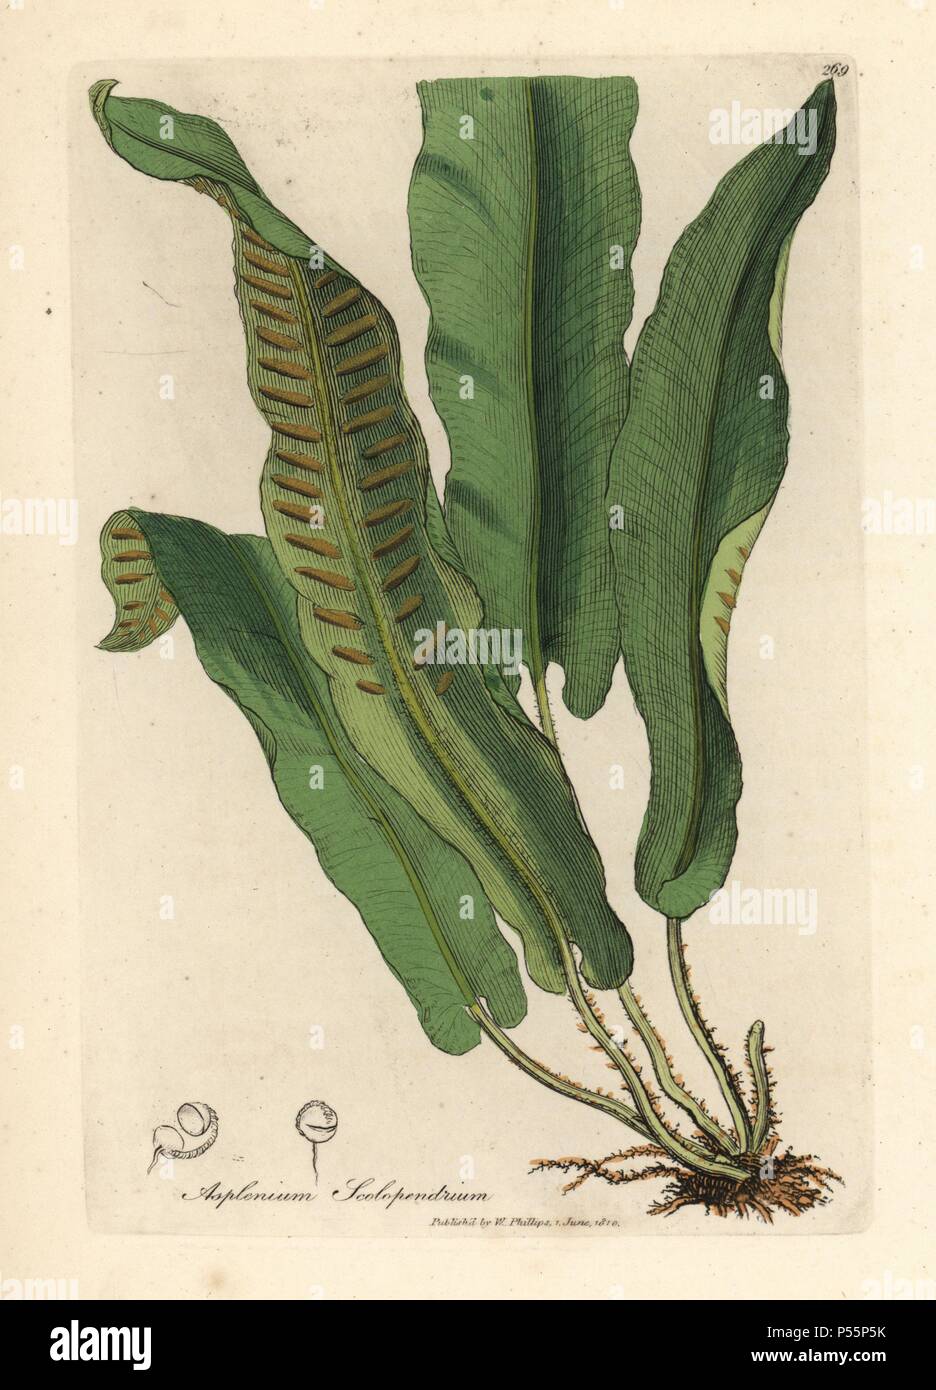 Harts-tongue fern, Asplenium scolopendrium. Handcolored copperplate engraving from a botanical illustration by James Sowerby from William Woodville and Sir William Jackson Hooker's 'Medical Botany' 1832. The tireless Sowerby (1757-1822) drew over 2,500 plants for Smith's mammoth 'English Botany' (1790-1814) and 440 mushrooms for 'Coloured Figures of English Fungi ' (1797) among many other works. Stock Photo